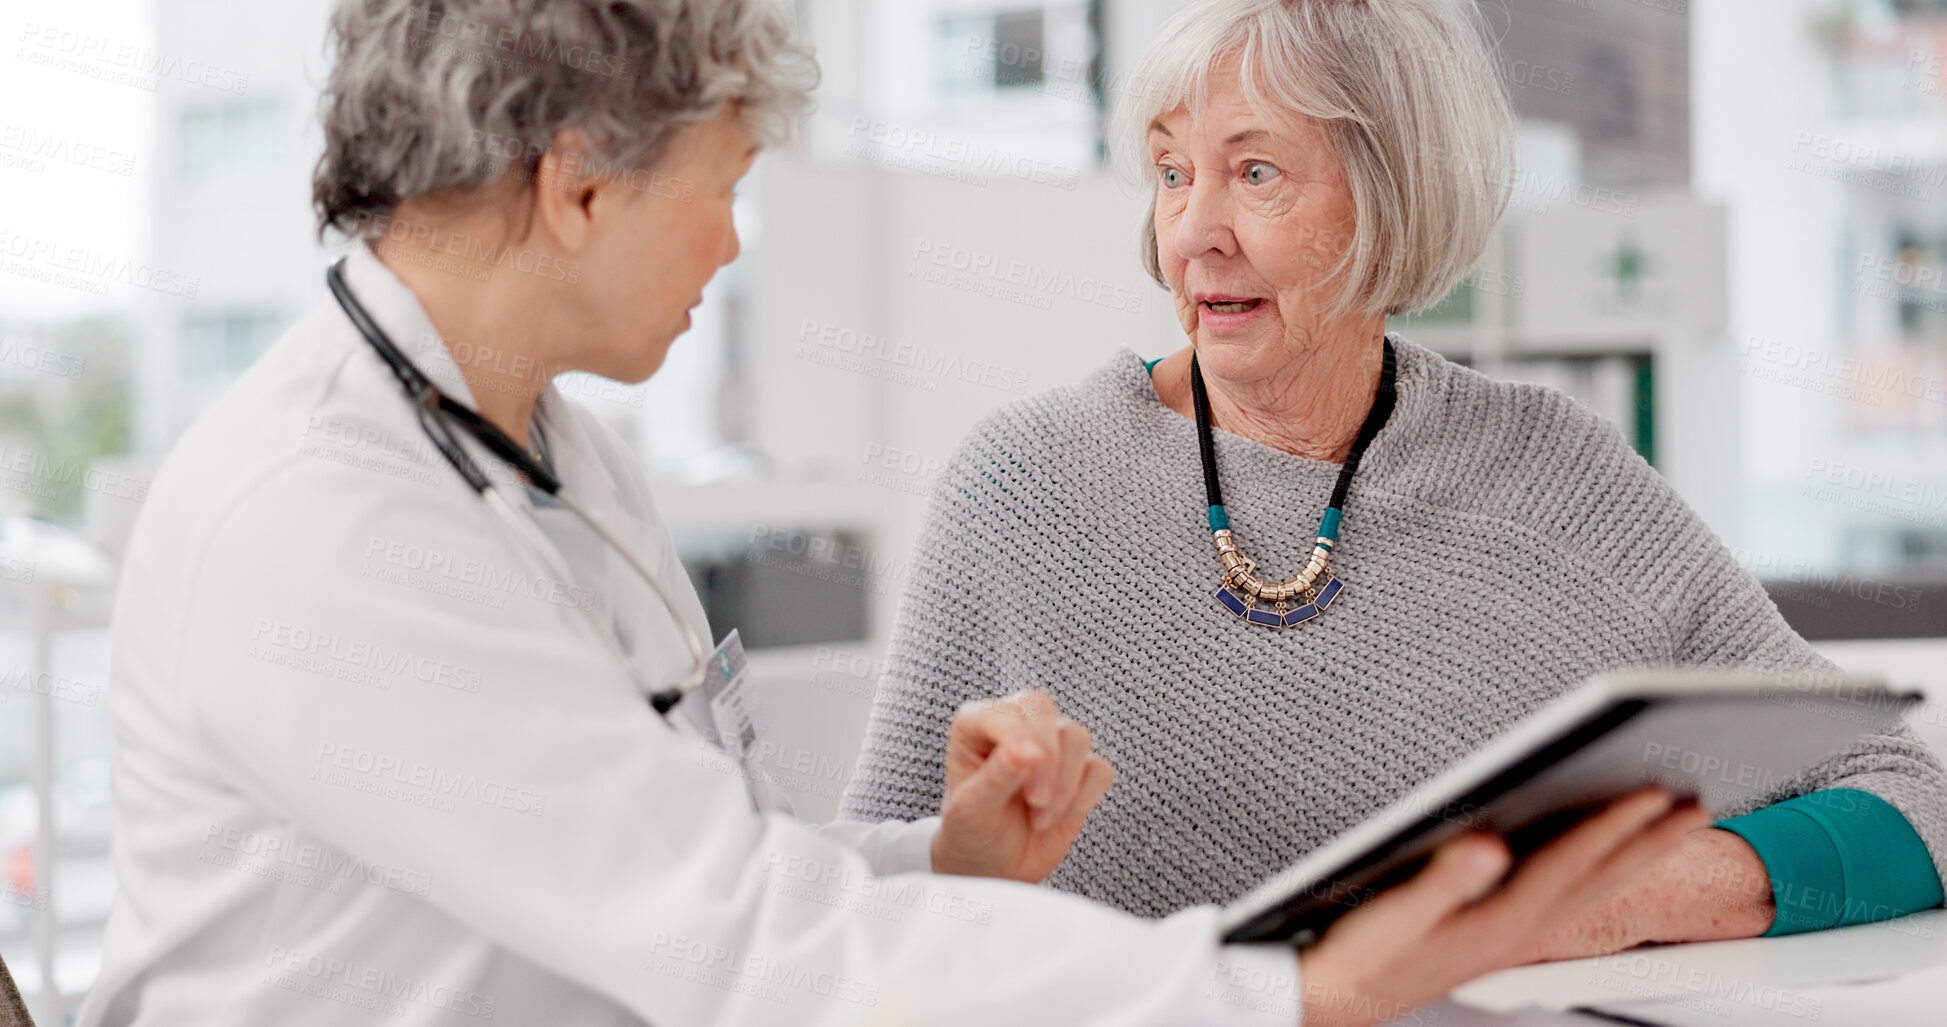 Buy stock photo Senior doctor, tablet and discussion with patient for healthcare prescription or diagnosis at hospital. Mature medical professional talking to elderly female person on technology for consultation